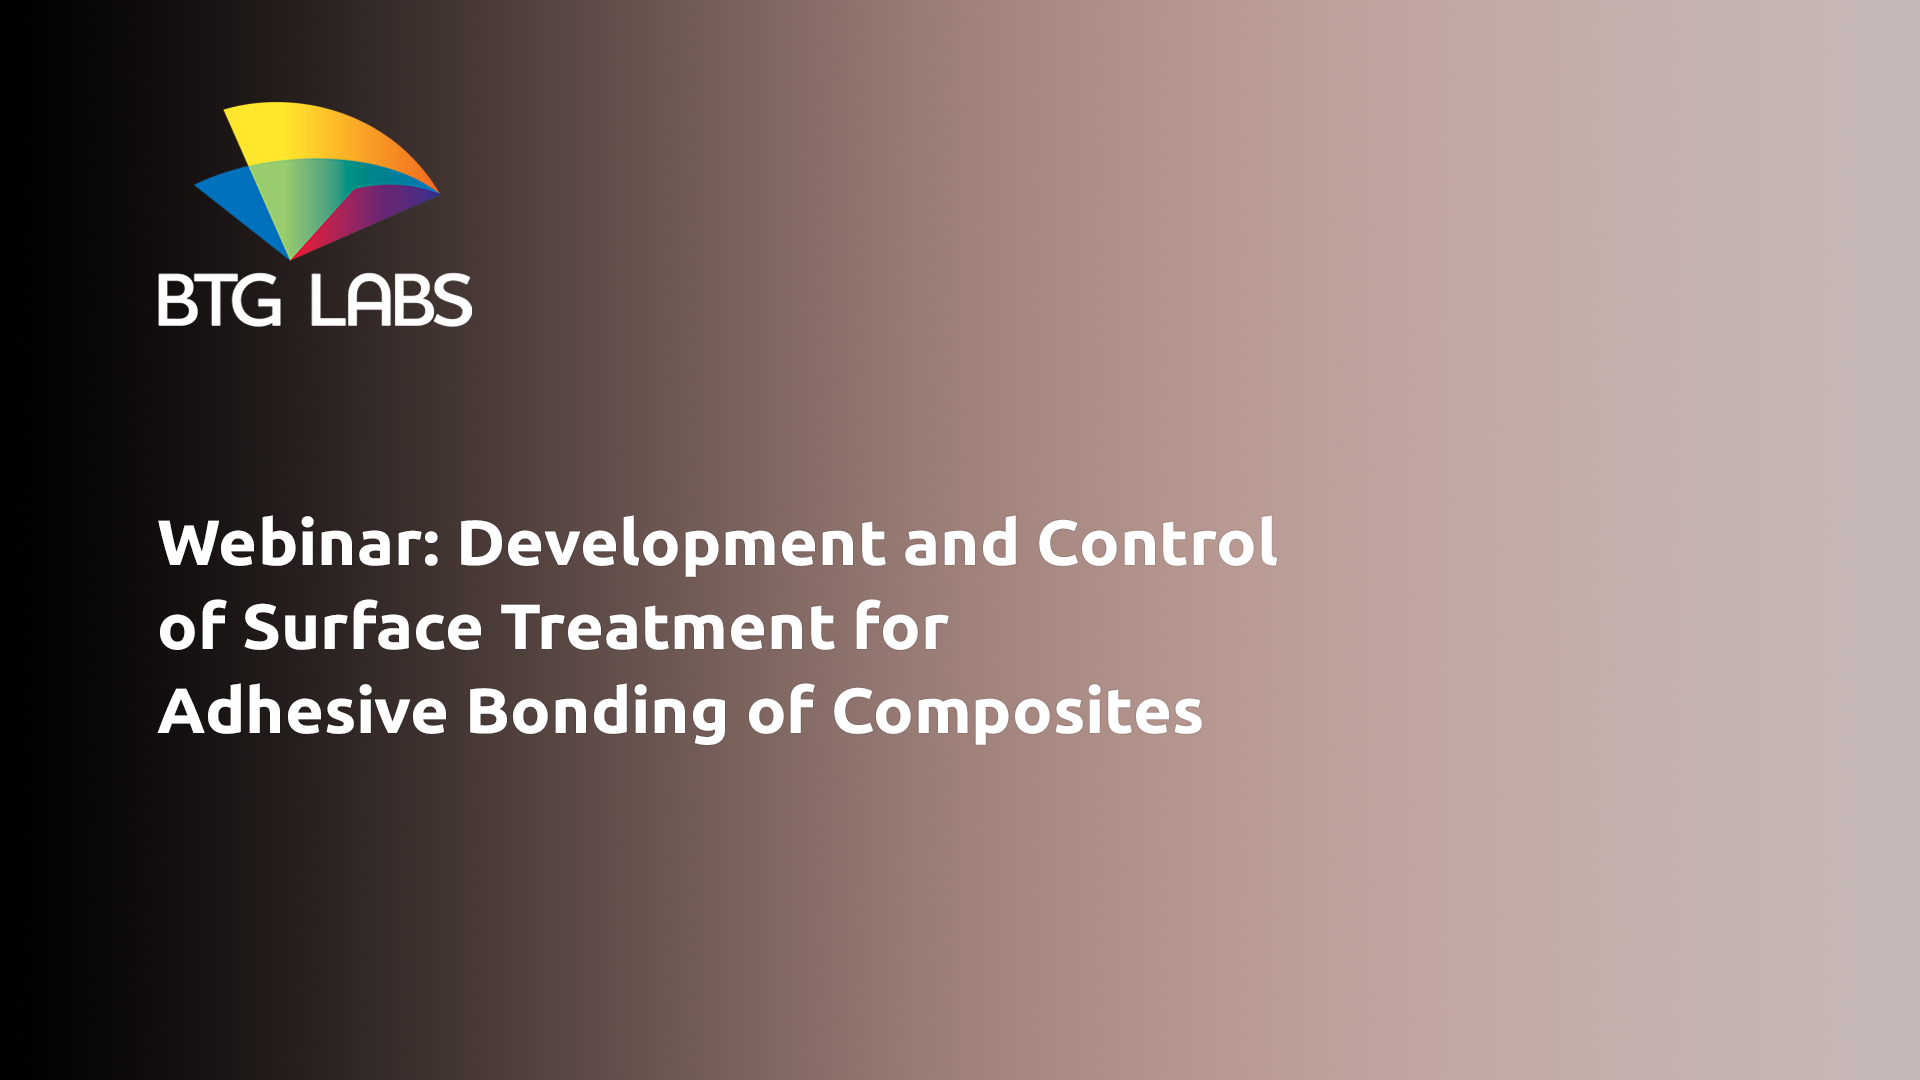 Webinar: Development and Control of Surface Treatments for Adhesive Bonding of Composites